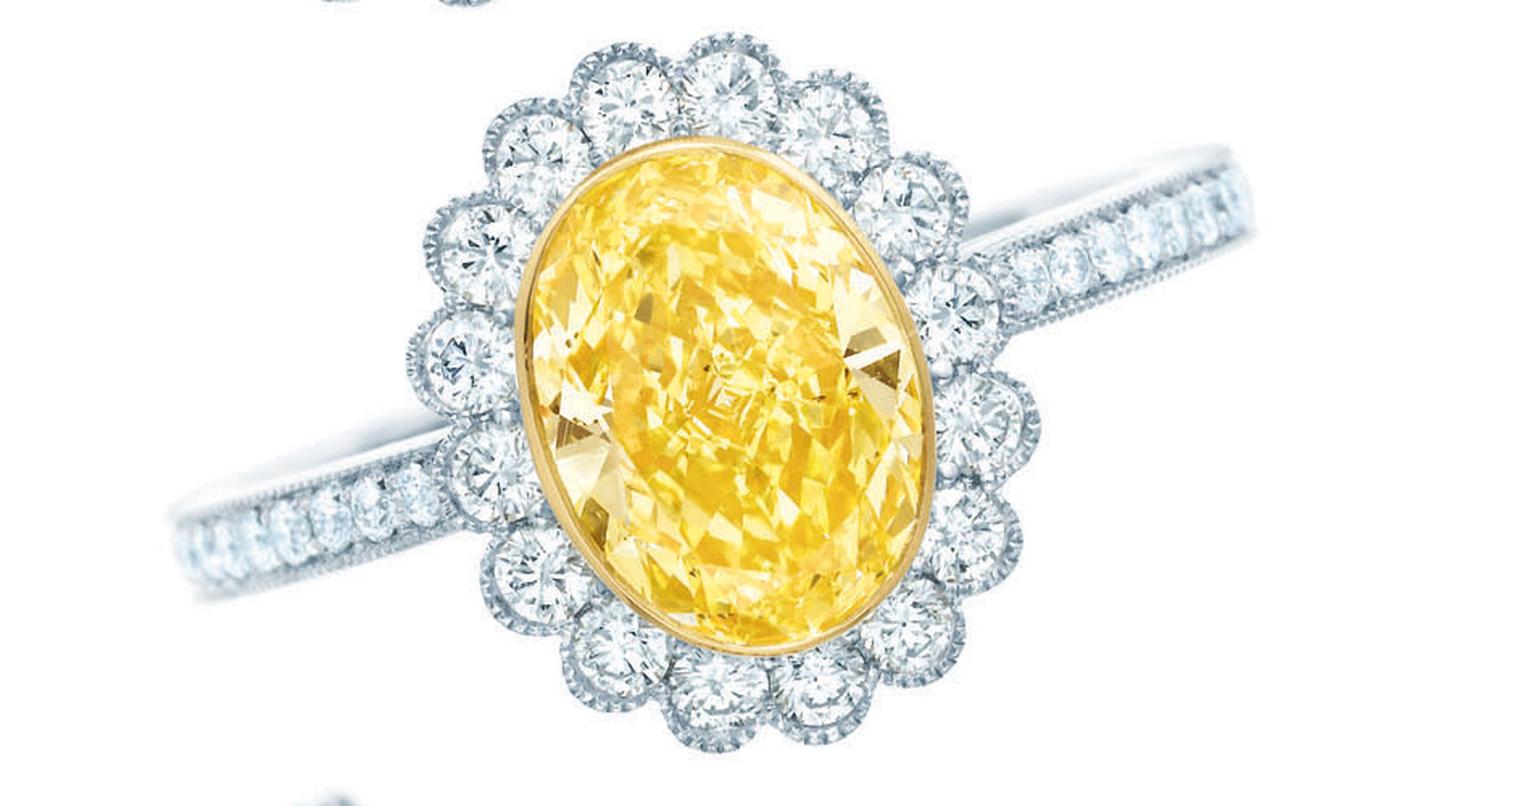 Tiffany-Enchant-yellow-and-white-diamond-rings-set-in-platinum-Oval